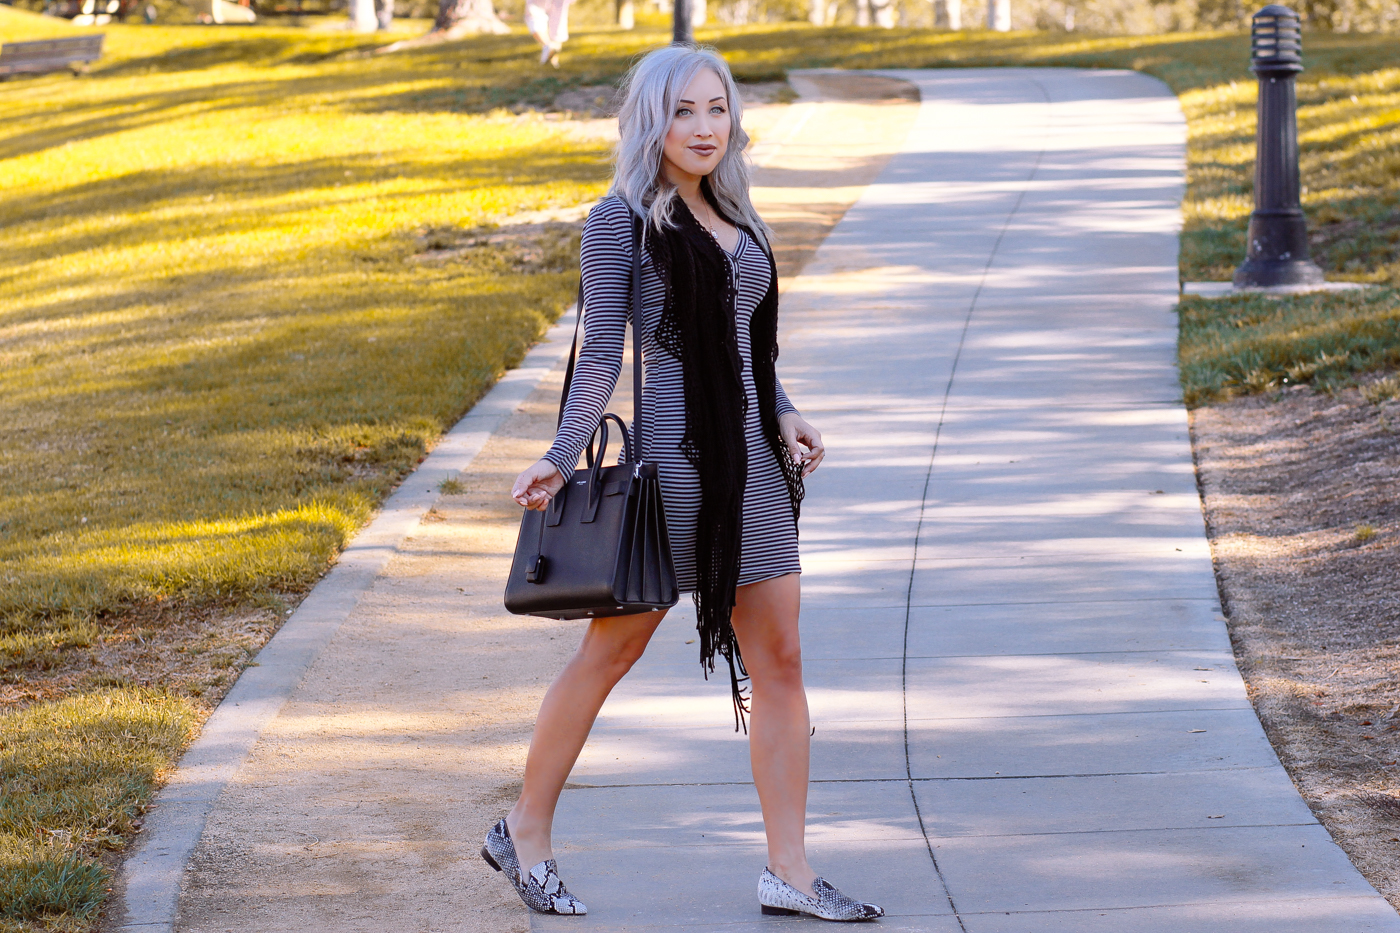 Blondie in the City | Button Down Bodycon Dress @Justfabonline | Snake Loafers @nakdfashion 20% off with code Hayley20